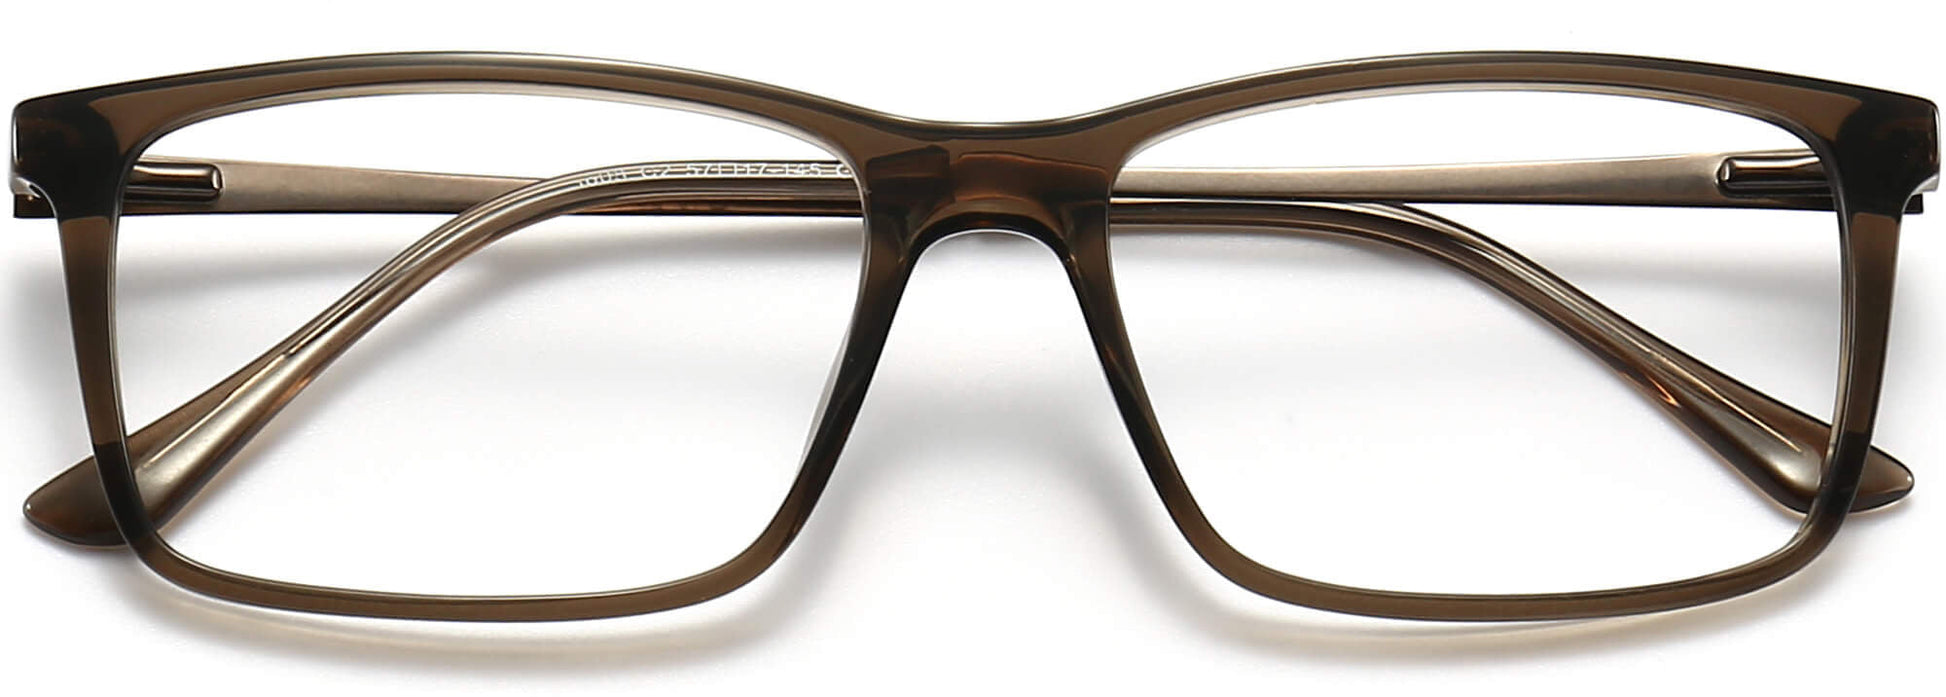 Layton Rectangle Gray Eyeglasses from ANRRI, closed view